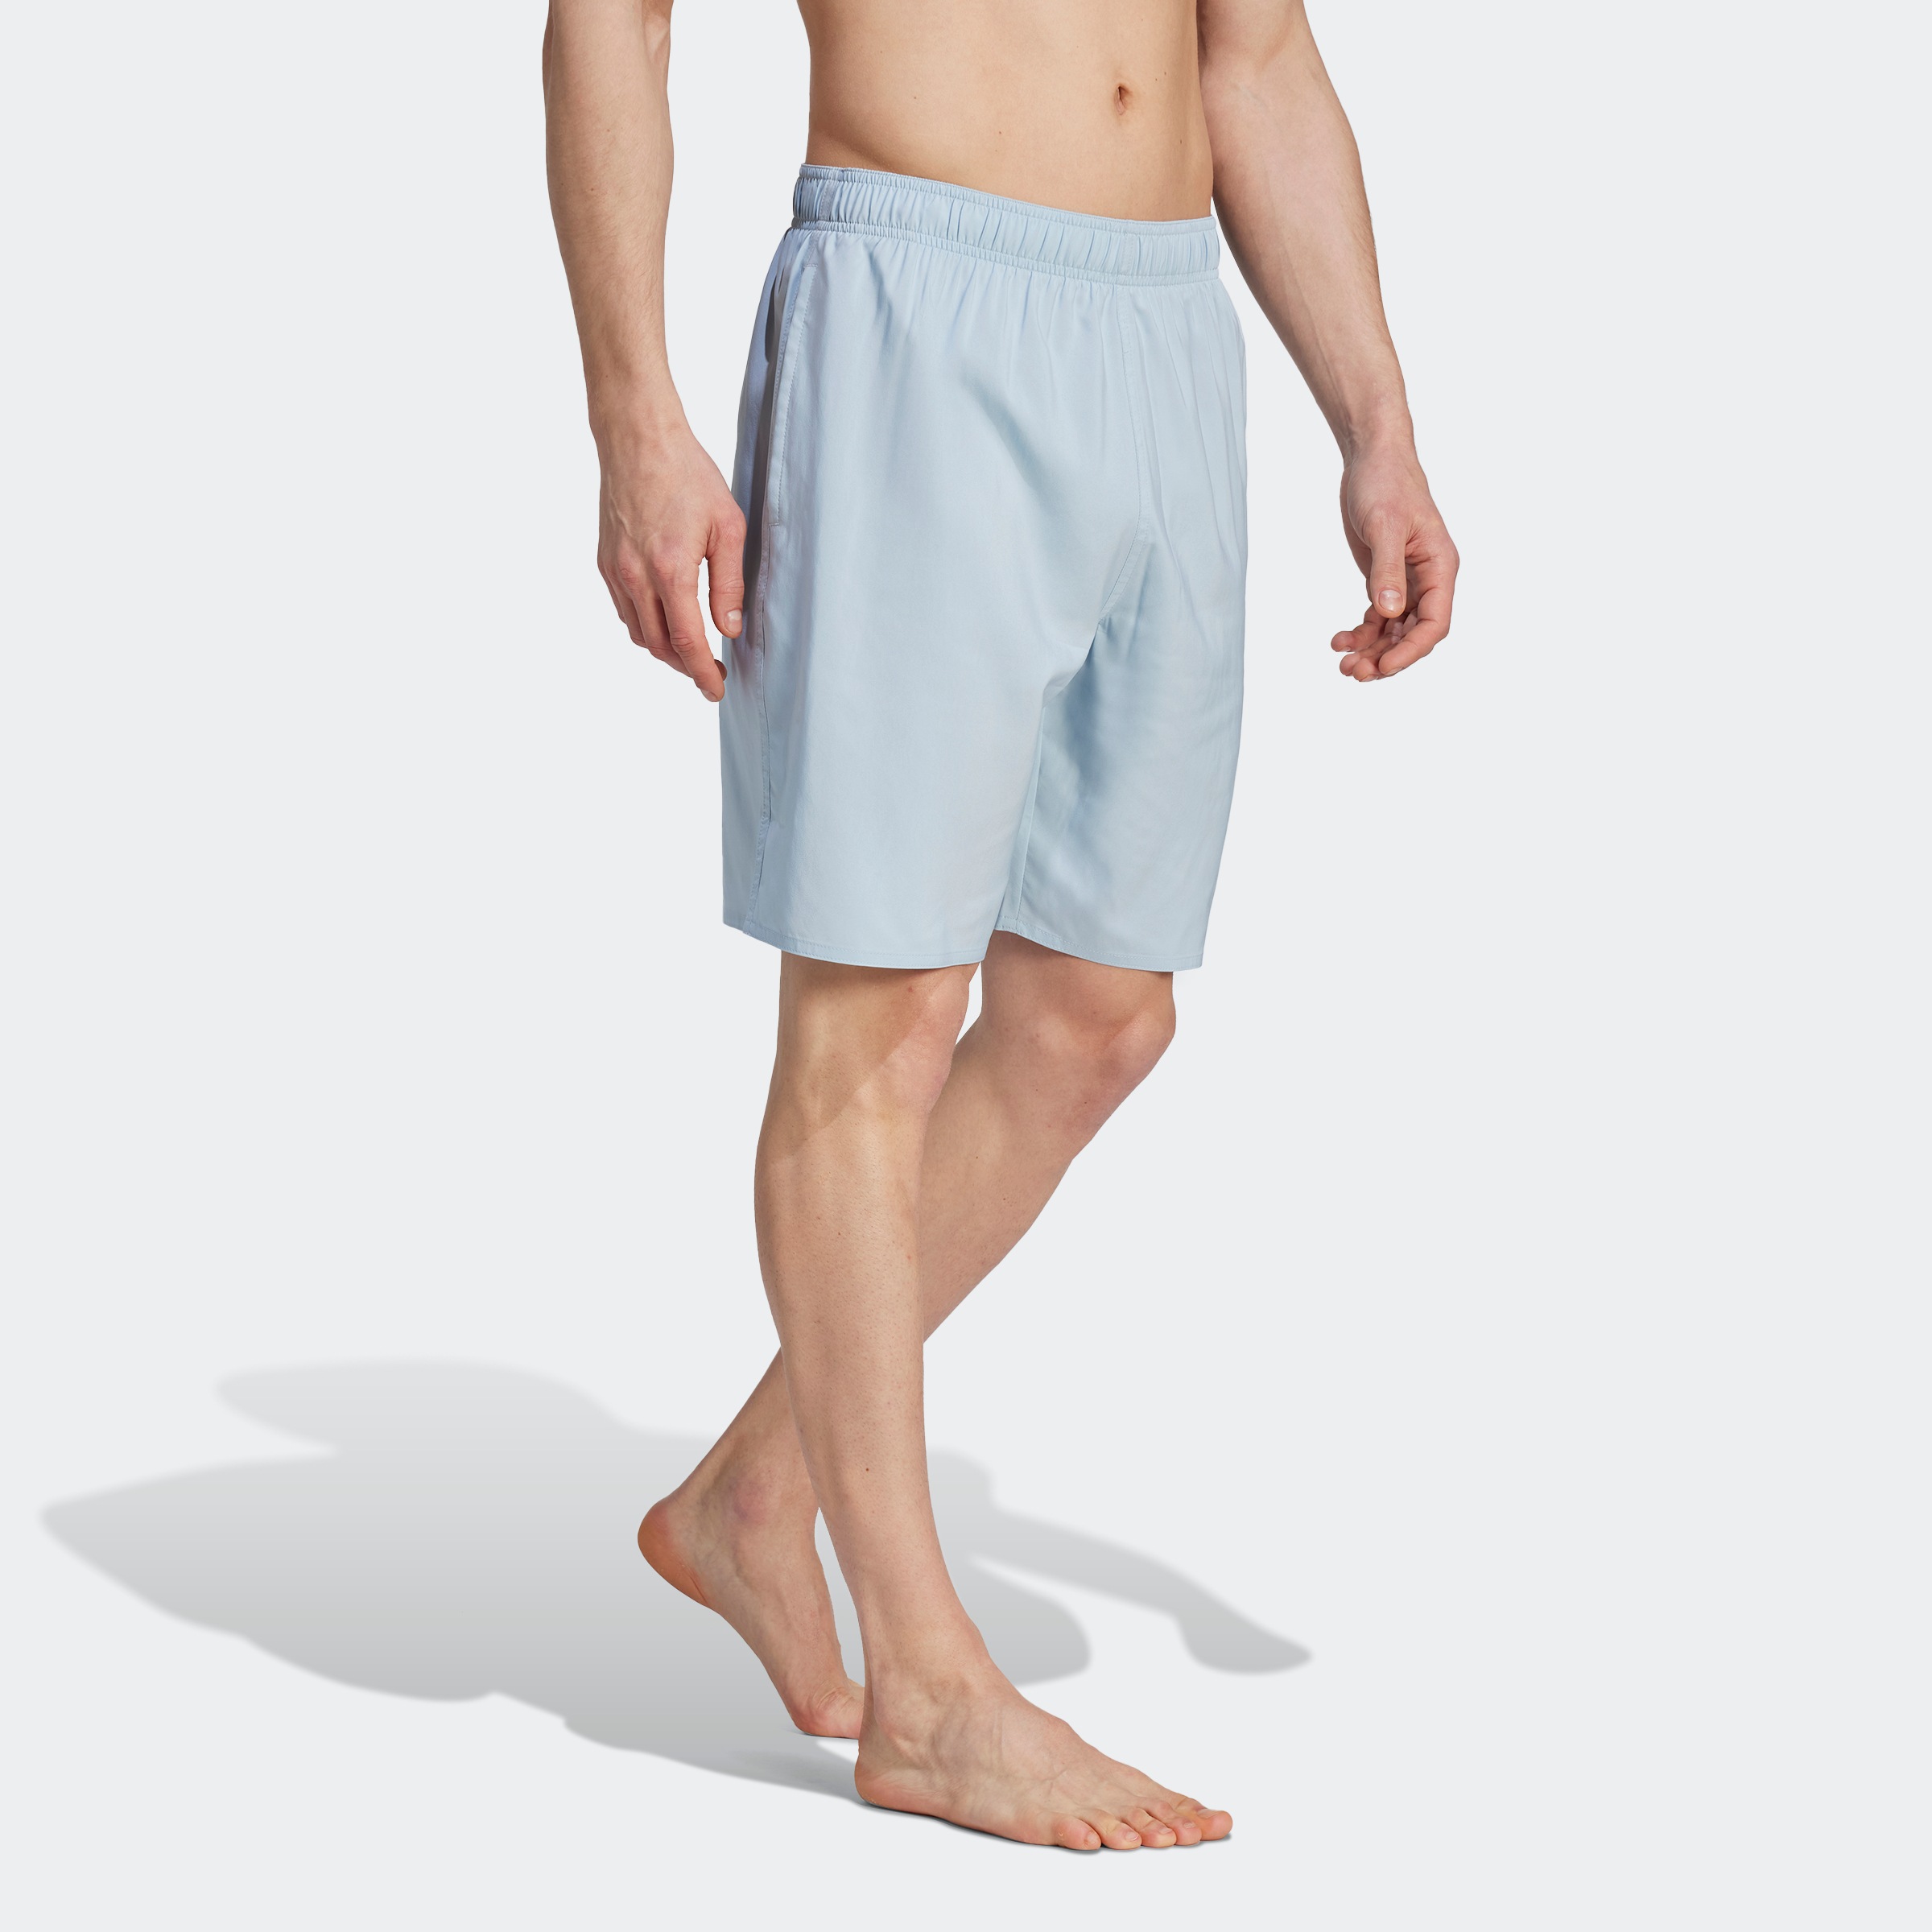 adidas Performance Badehose »SOLID Online Shop CLX (1 OTTO St.) CLASSICLENGTH«, im